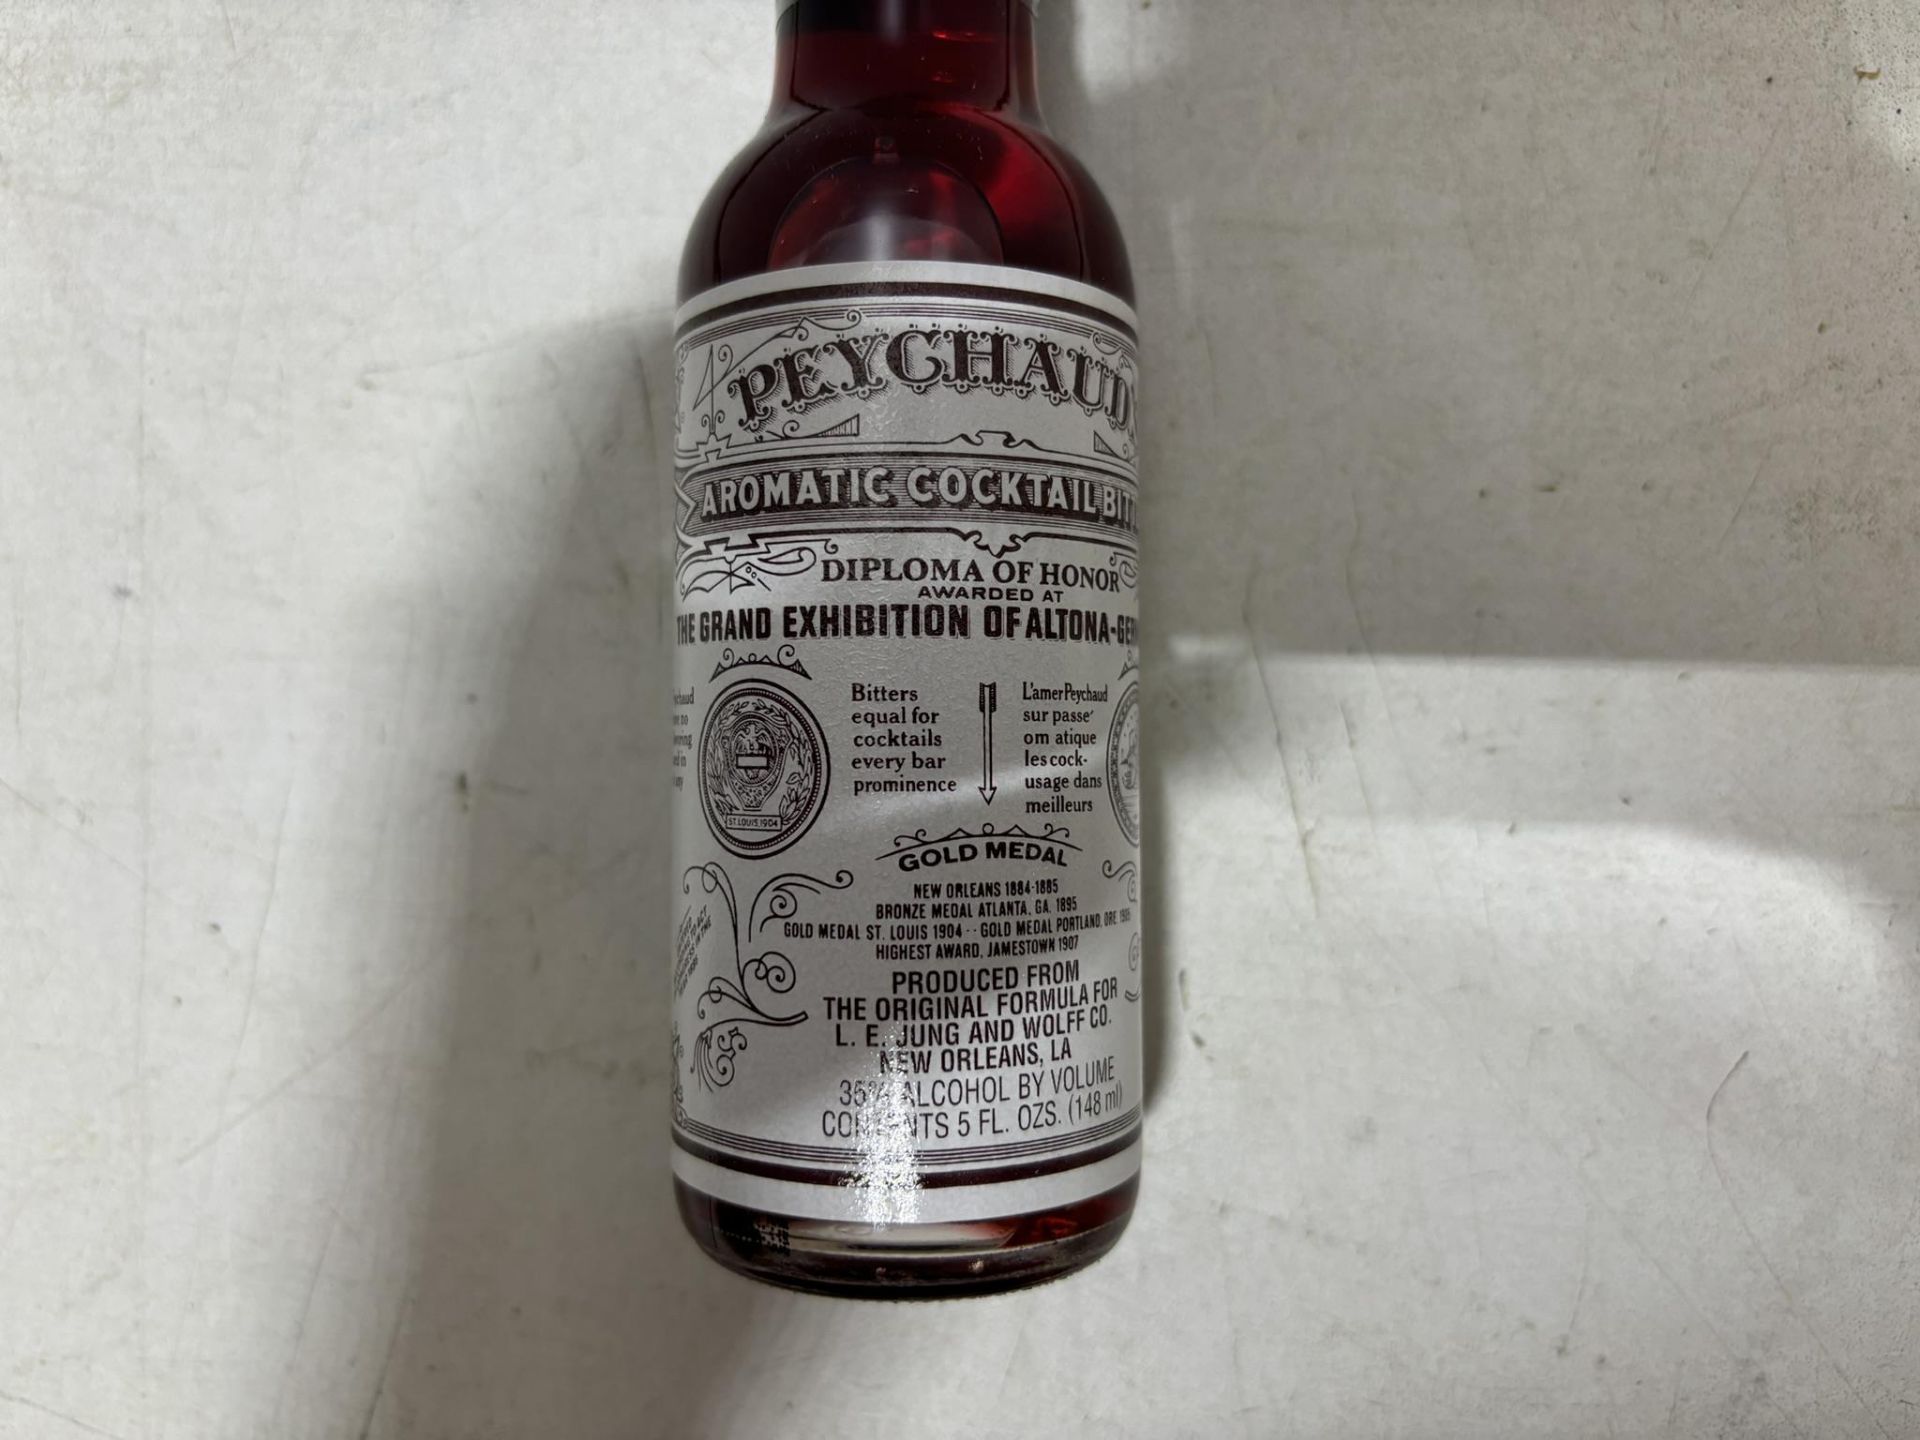 20 X Bottles Of Peychaud's Aromatic Cocktail Bitters 148Ml - Image 2 of 4